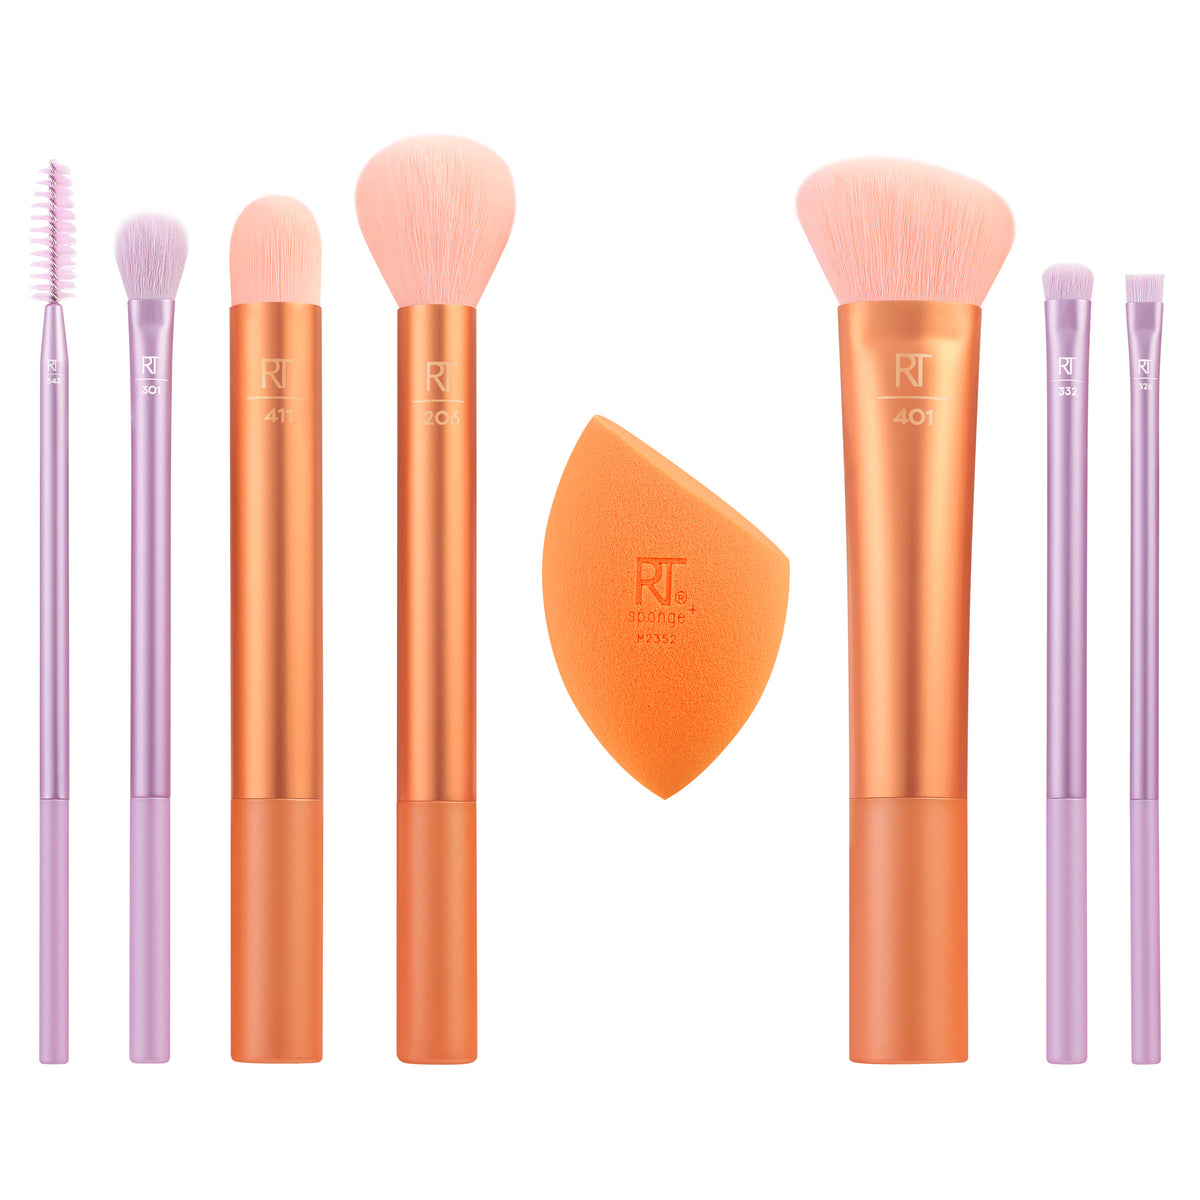 Real Techniques Level Up Brush And Sponge Kit, Makeup Brushes For  Eyeshadow, Foundation, Blush, & Bronzer, Makeup Blending Sponge,  Professional Quality Makeup Tools, Synthetic Bristles, 8 Piece Set